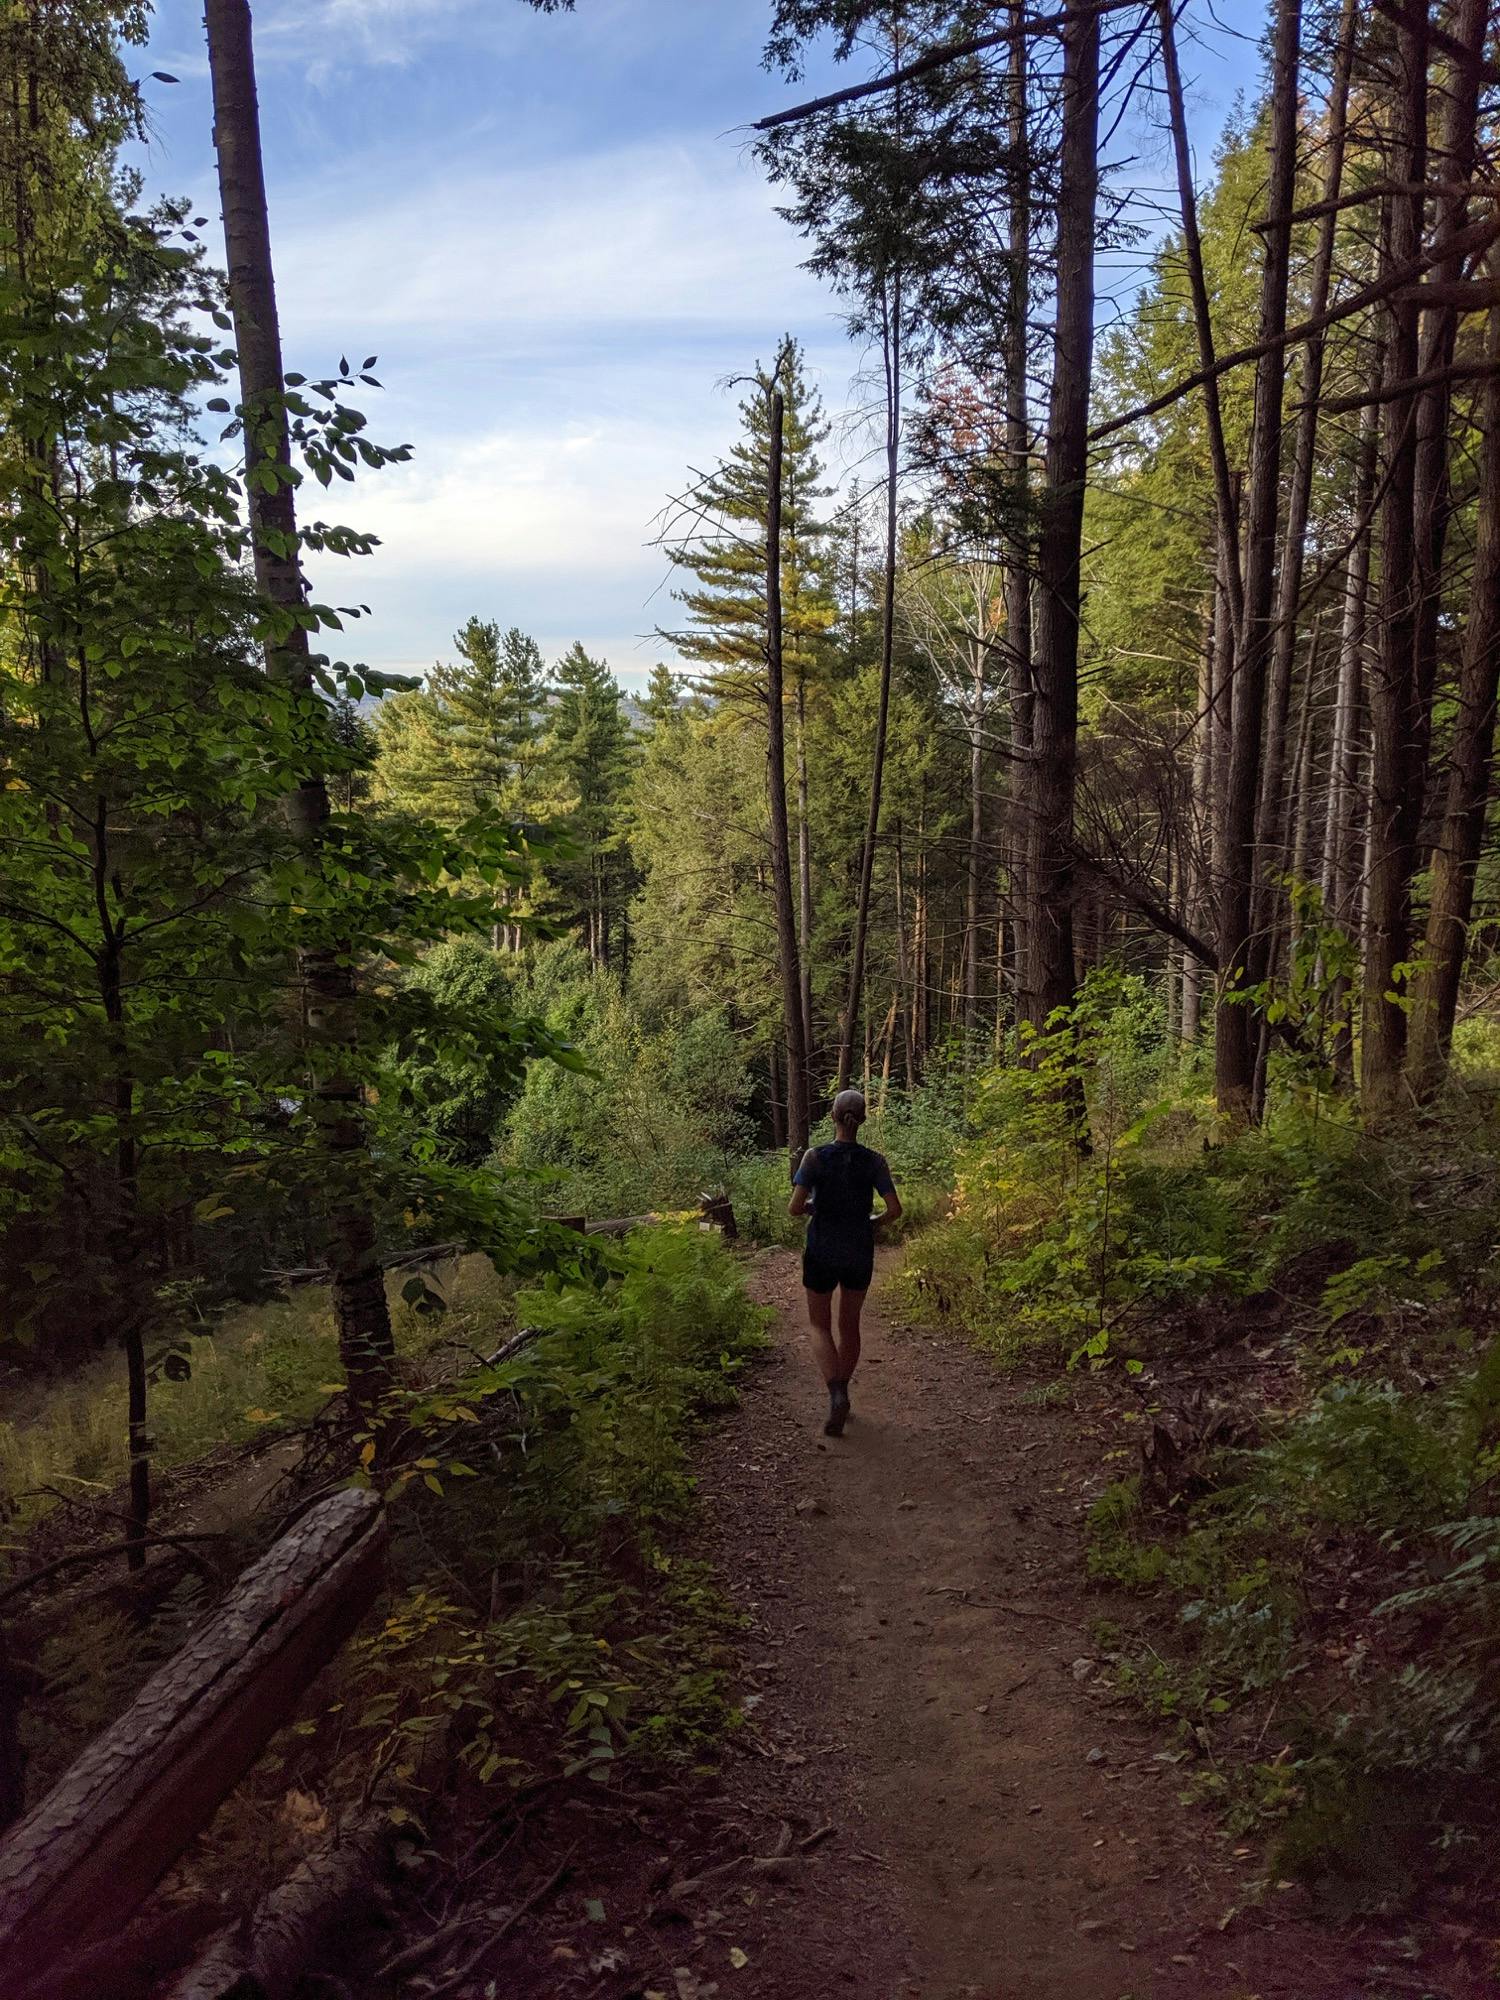 Out of the woods to the finish. Photo: Doug Lipinski